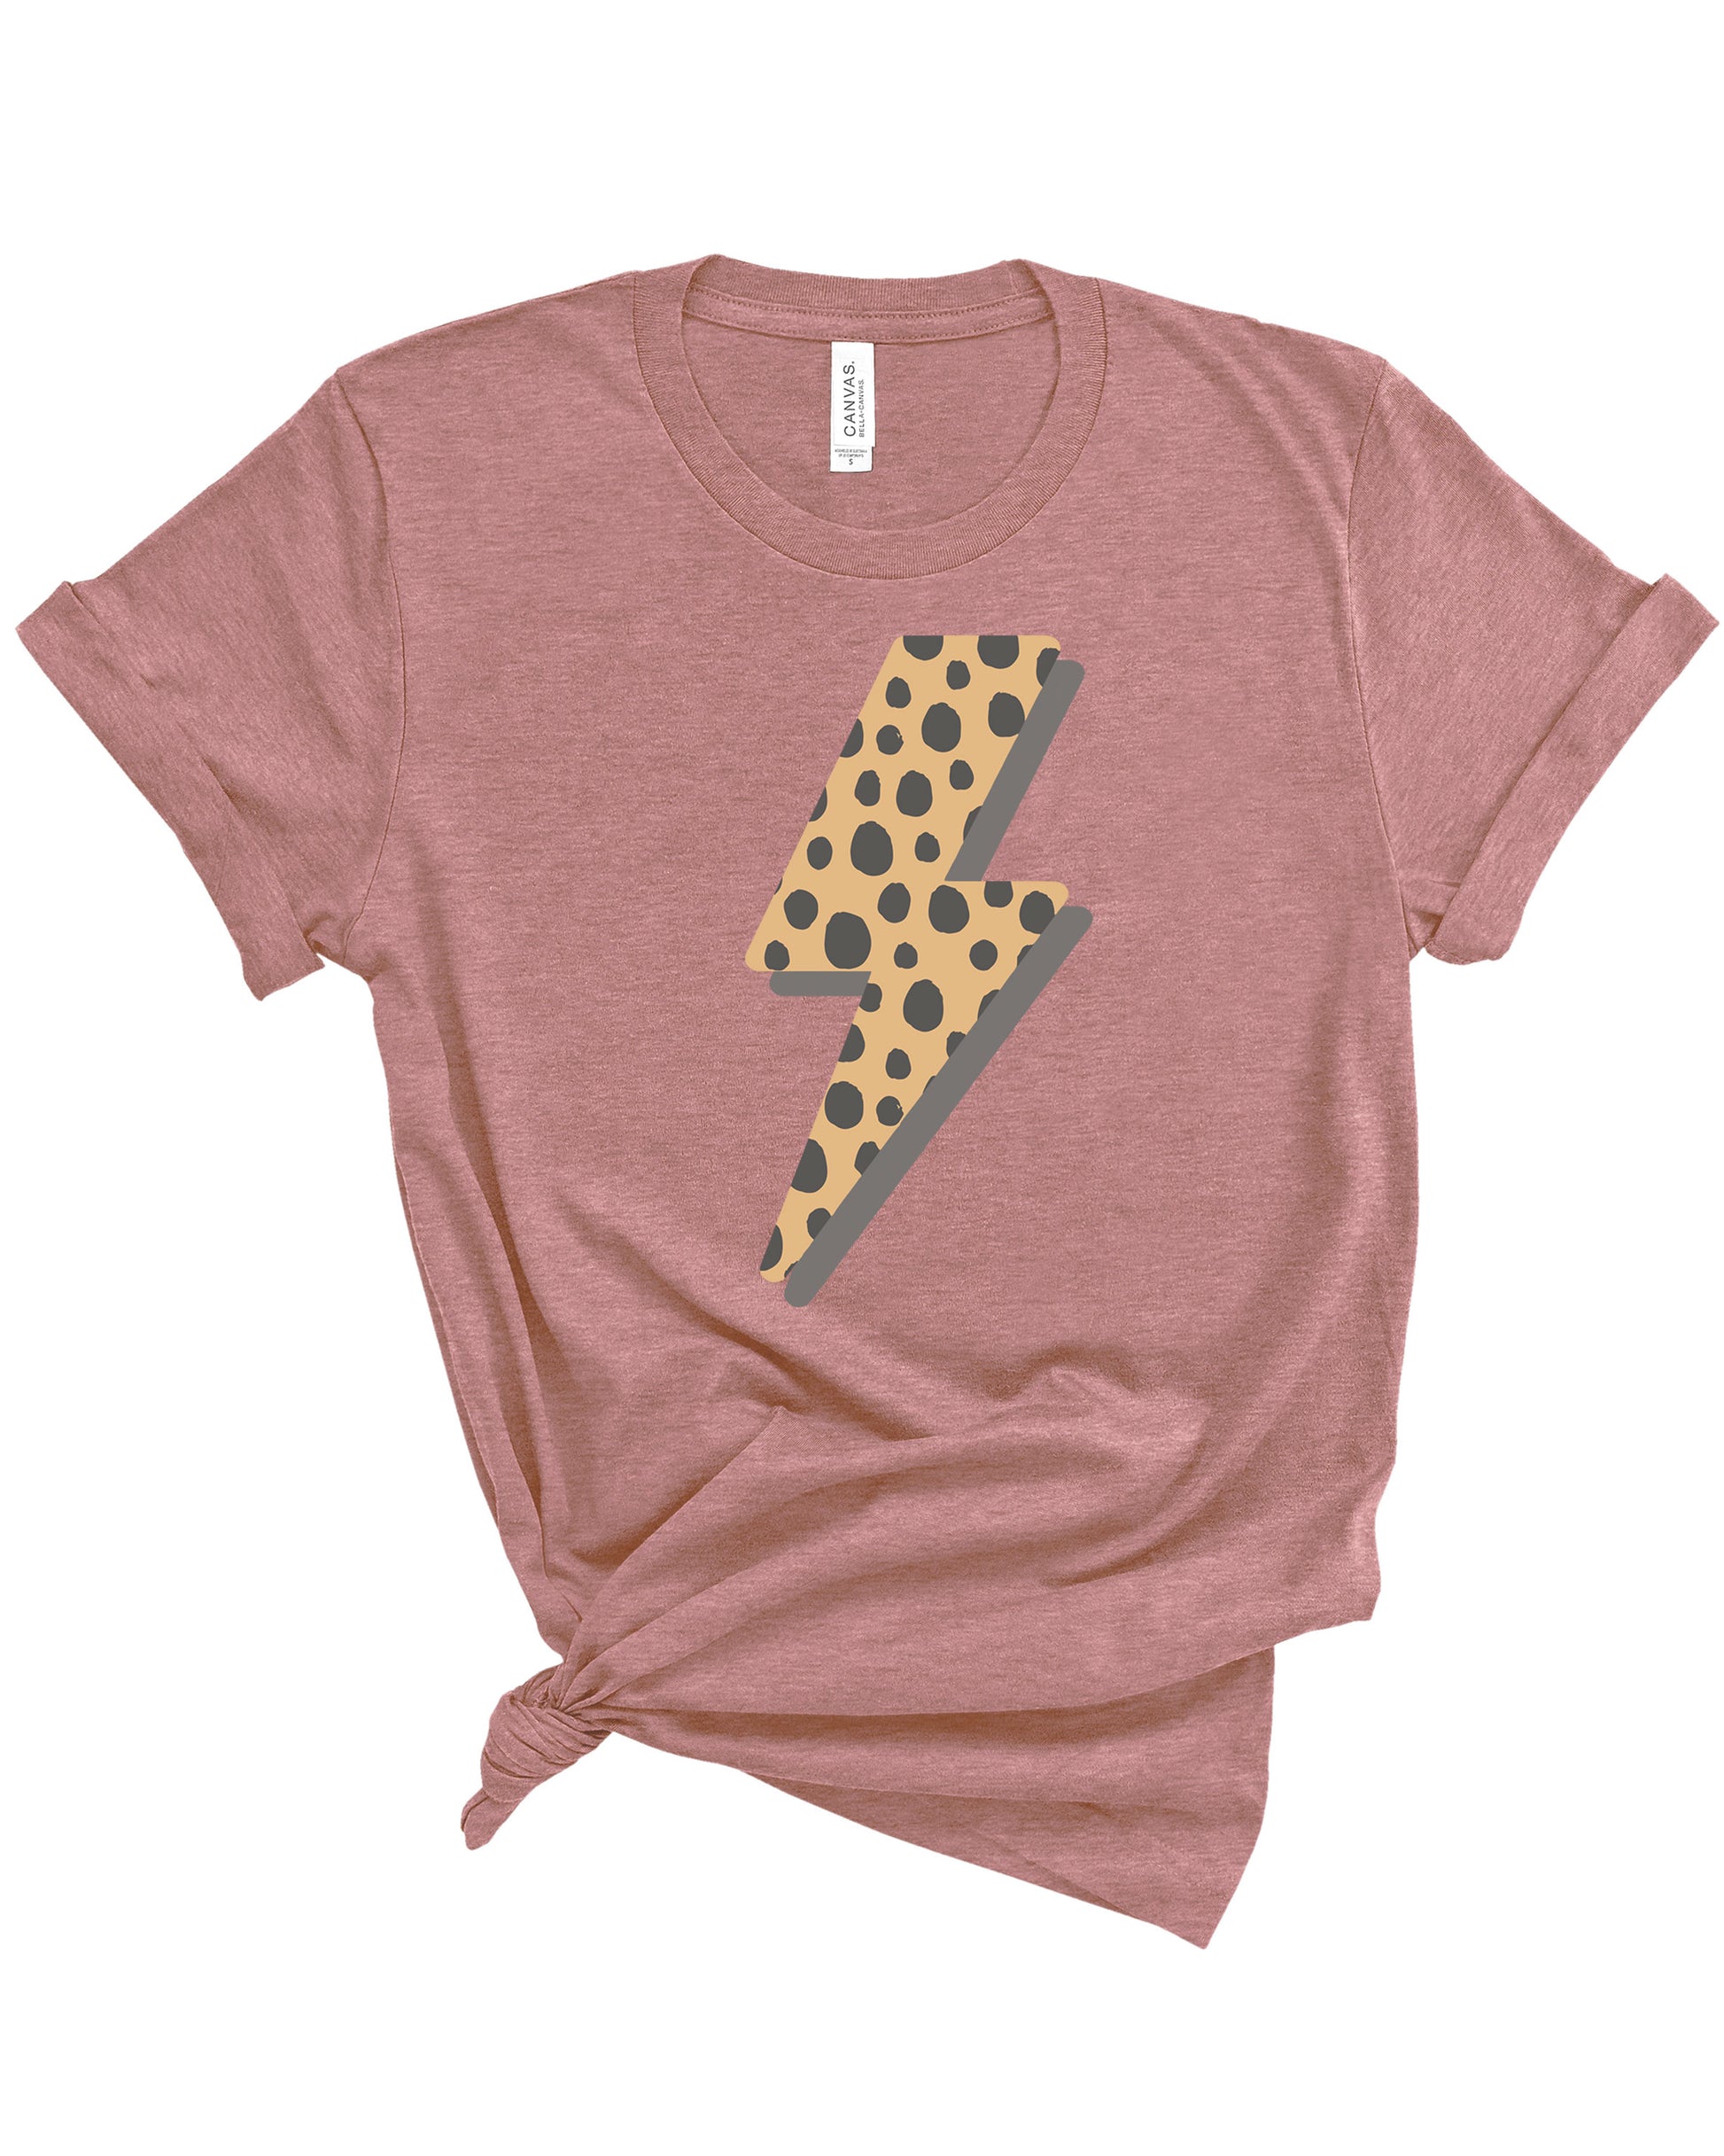 Cheetah Bolt | Adult Tee-Adult Tee-Sister Shirts-Sister Shirts, Cute & Custom Tees for Mama & Littles in Trussville, Alabama.